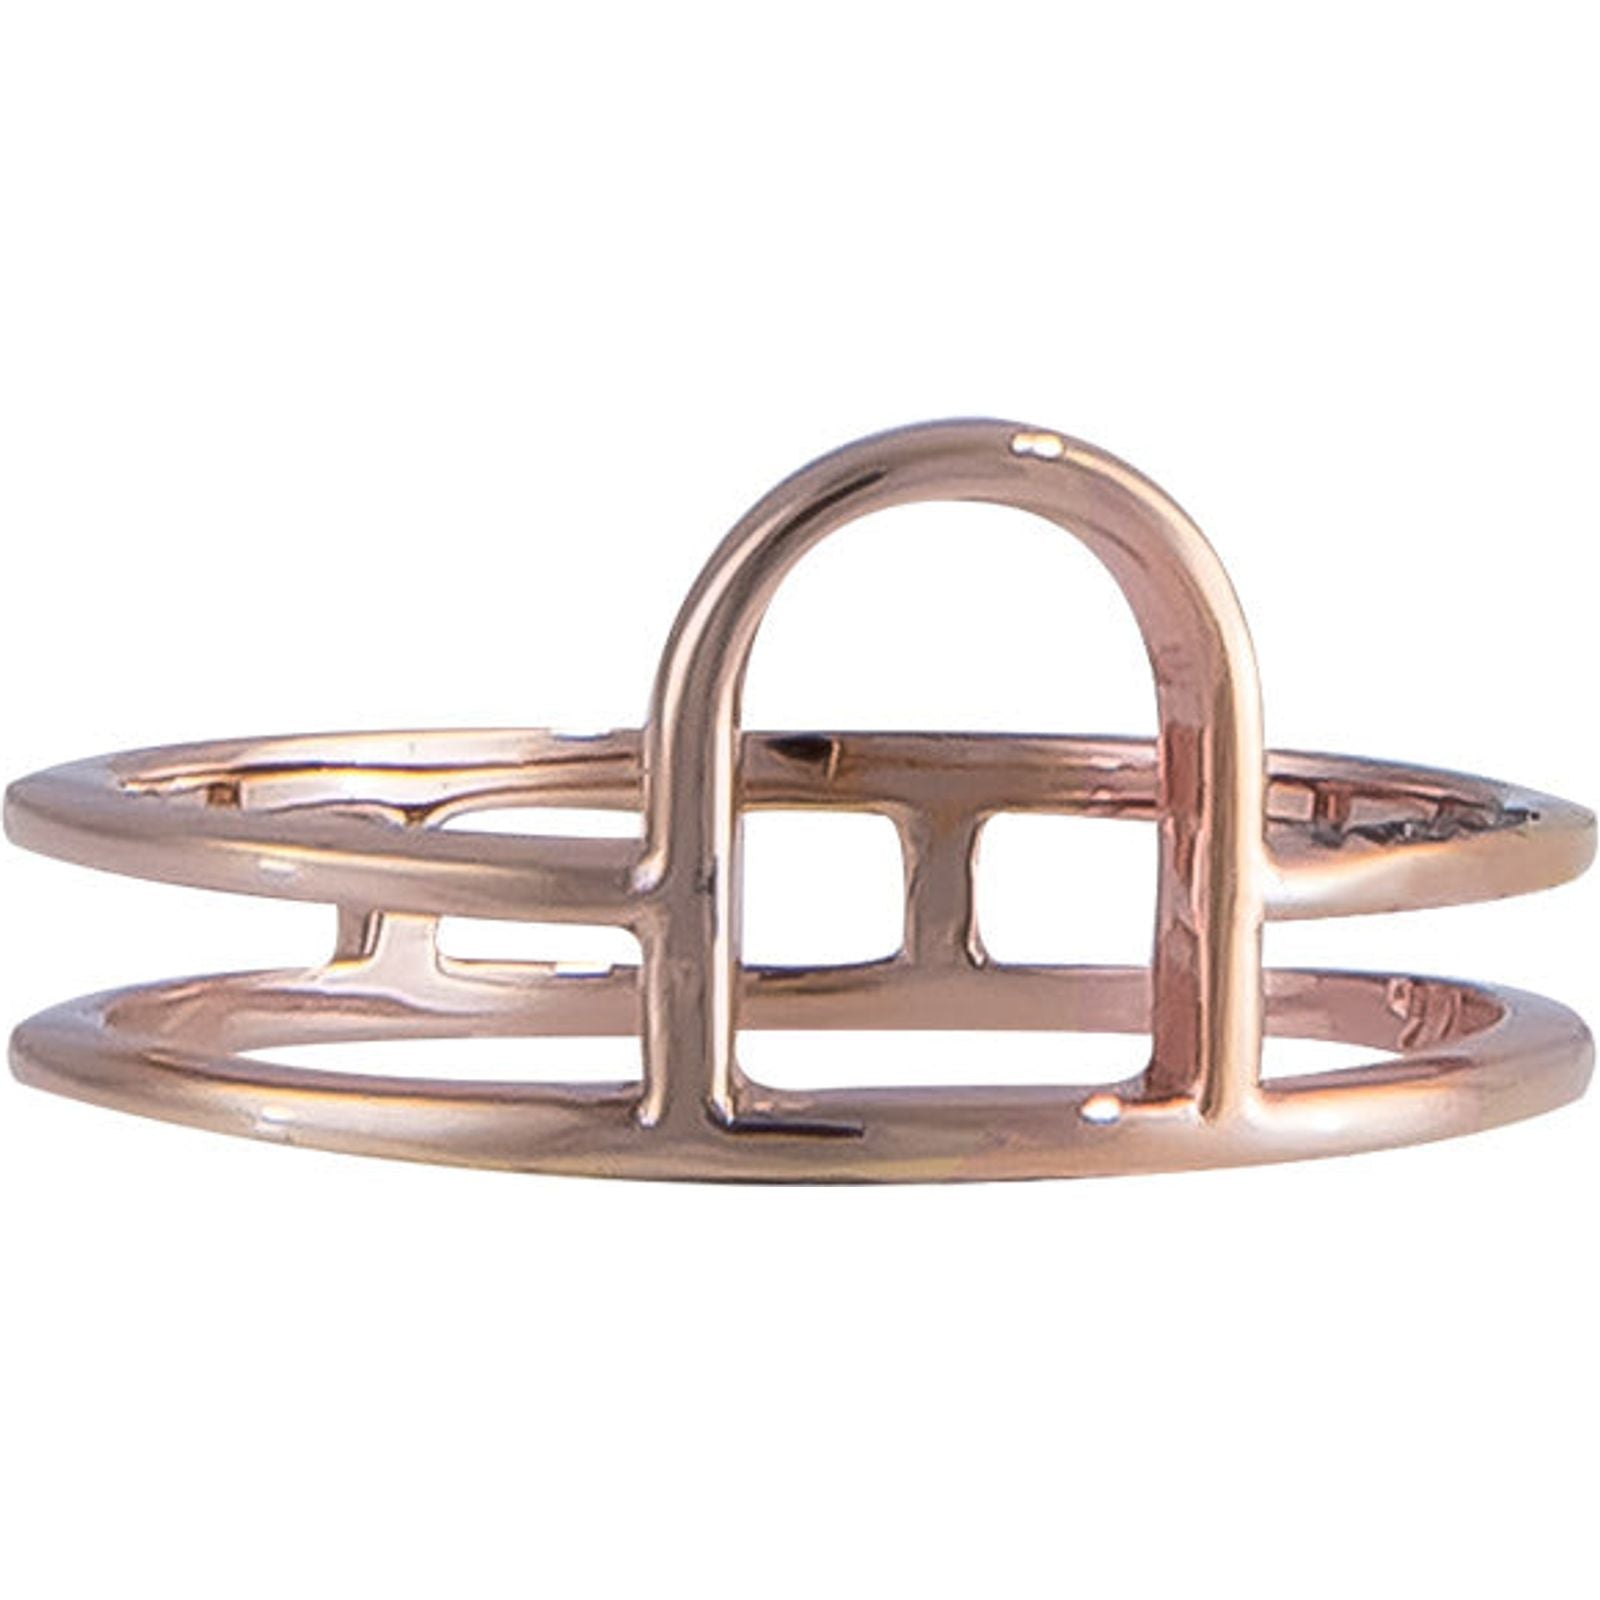 Ring Rosa Doble Arco